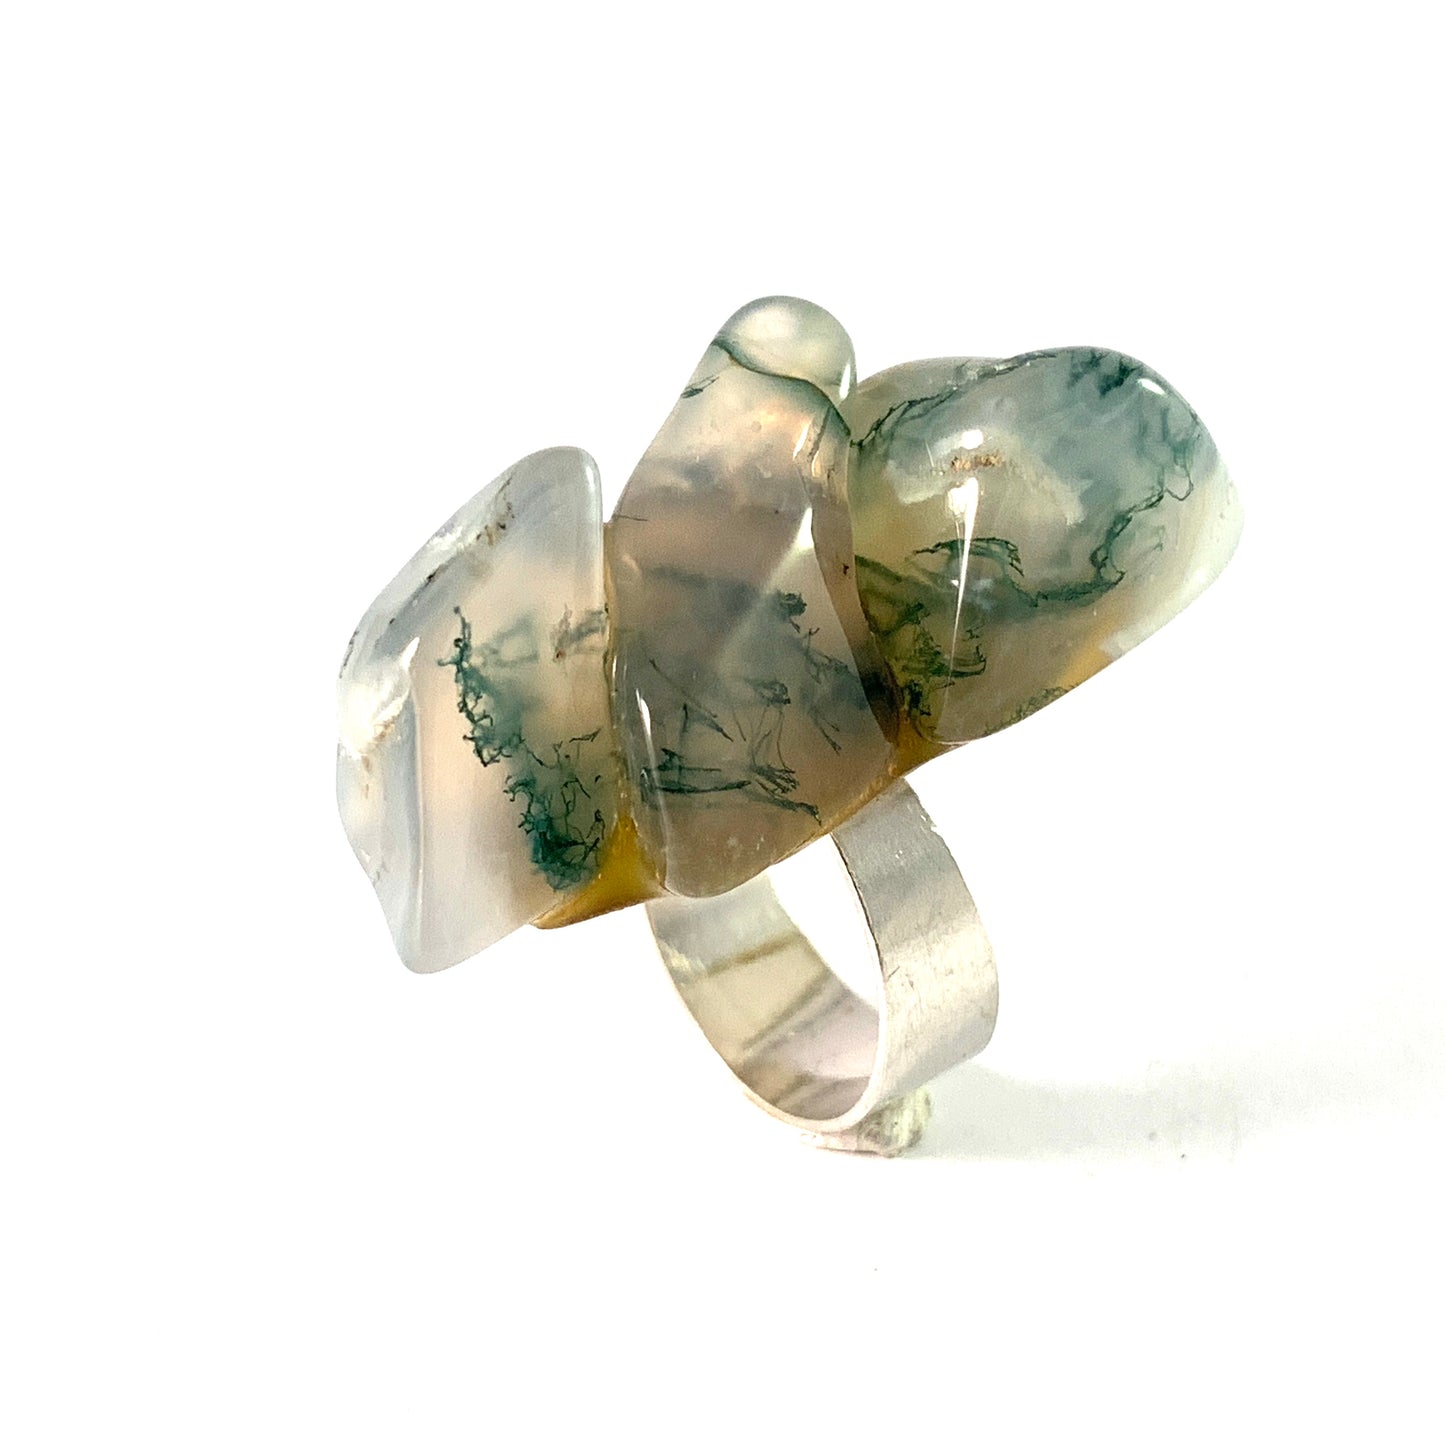 Svedbom, Sweden 1969. Sterling Silver Large Moss Agate Ring.